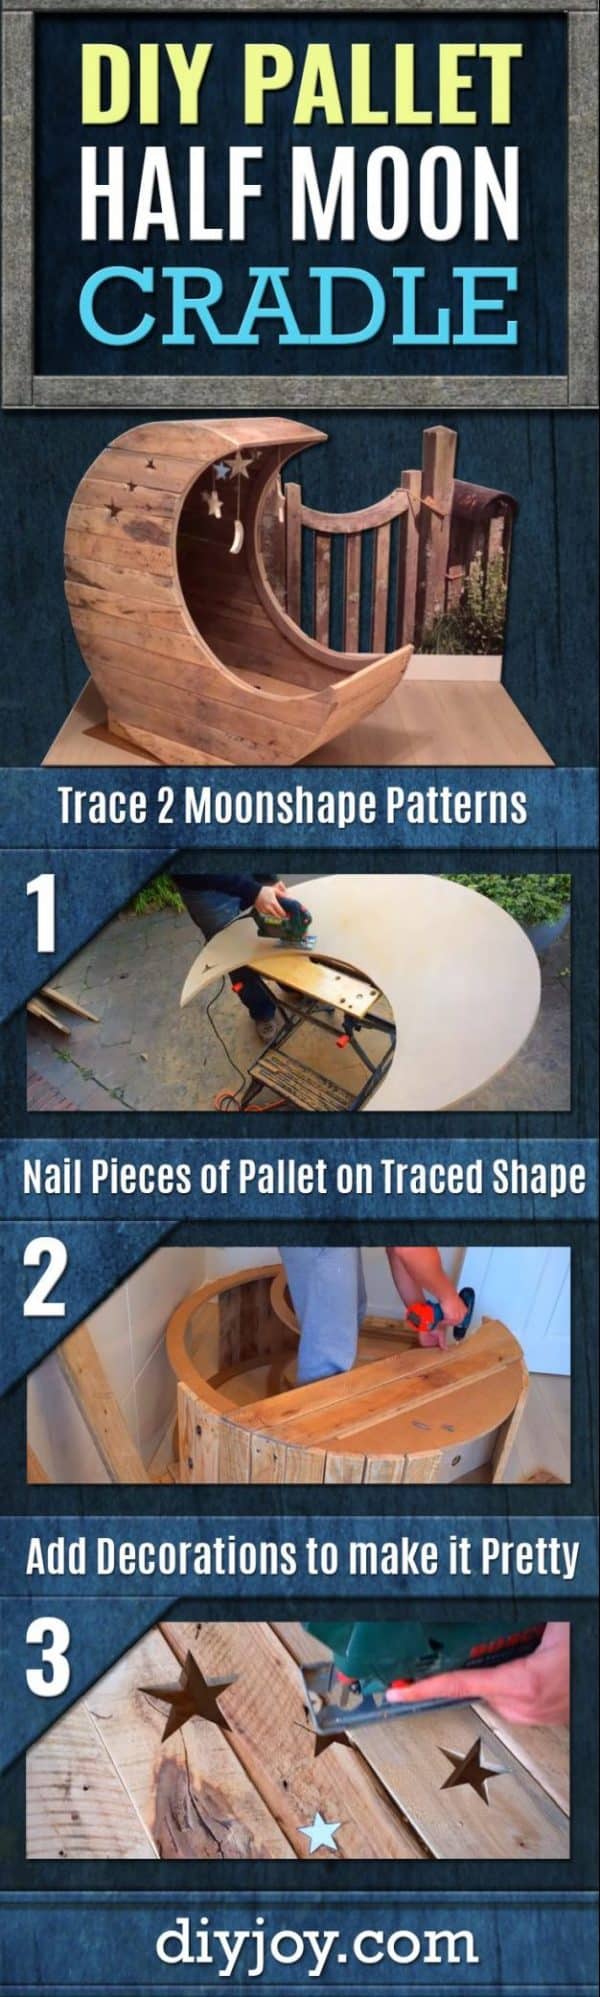 How to Make A Pallet Cradle | DIY Baby Gifts for Furniture and Nursery Decor - wooden Moon Shaped Cradle for Babies Room - DIY Wood Pallet Furniture Ideas